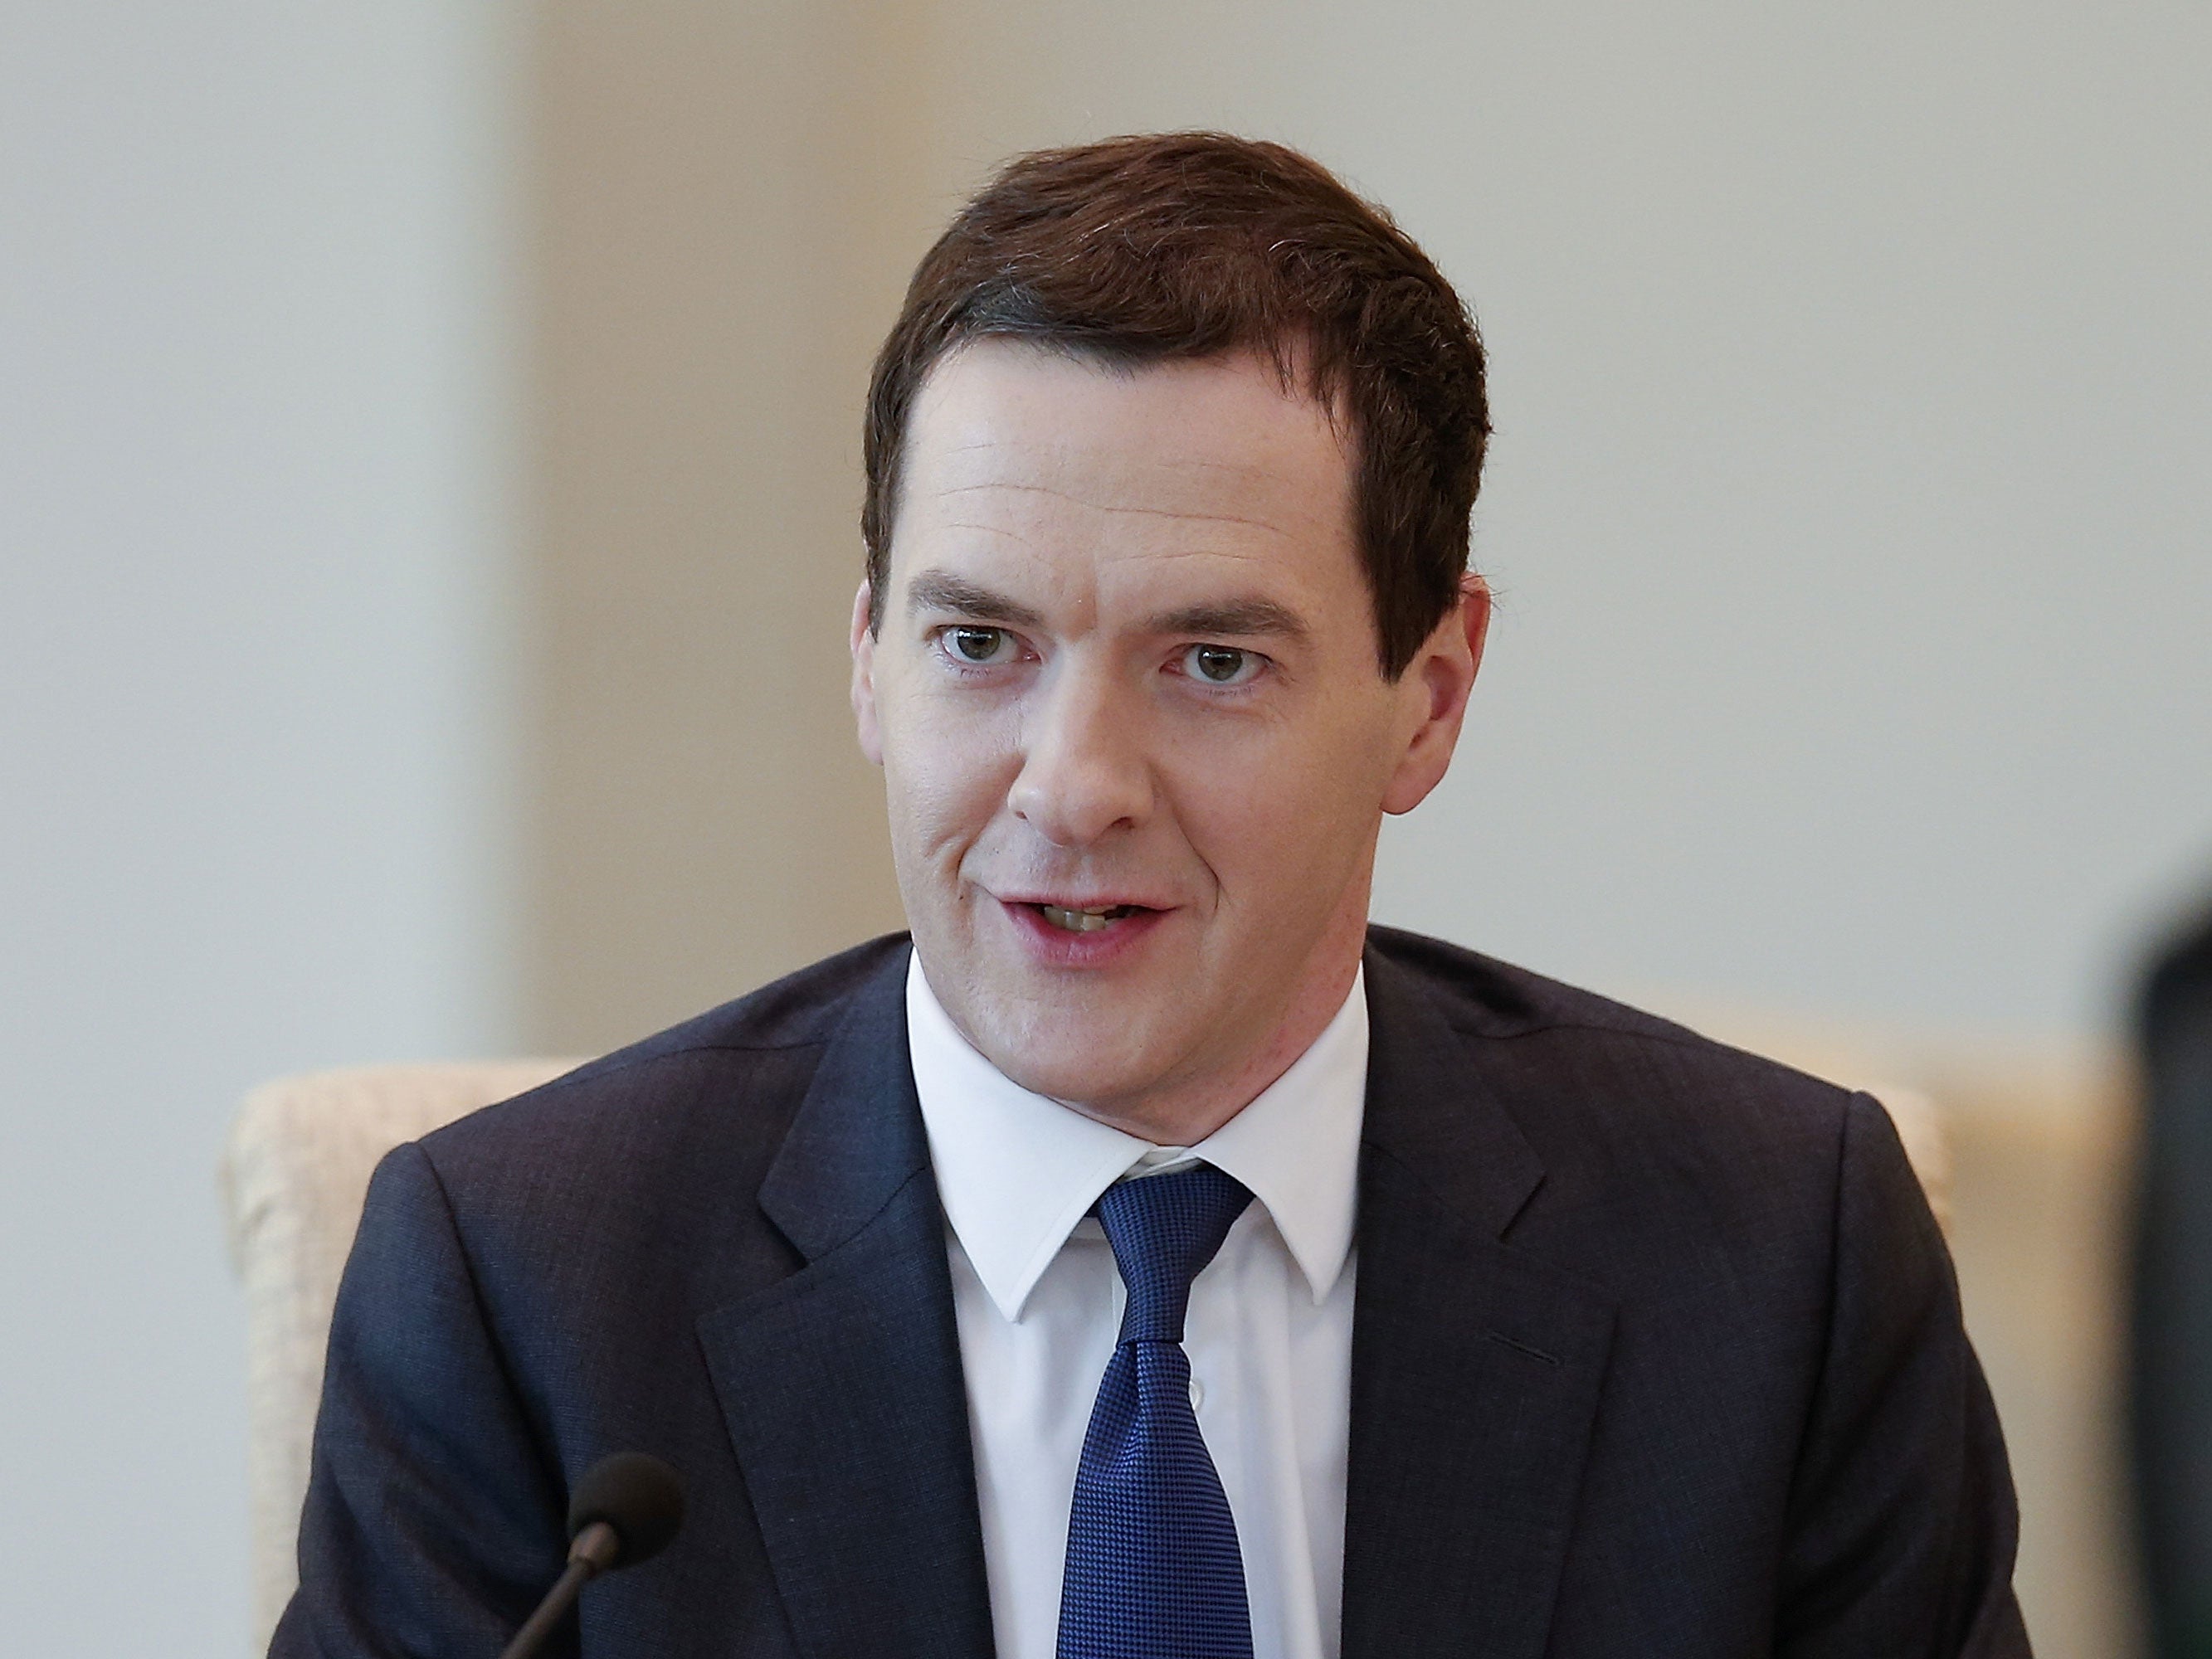 Chancellor of the Exchequer George Osborne speaks with Chinese Vice President Ma Kai (not pictured) during the 7th China-UK strategic economic dialogue at Diaoyutai State Guesthouse on September 21, 2015 in Beijing, China.